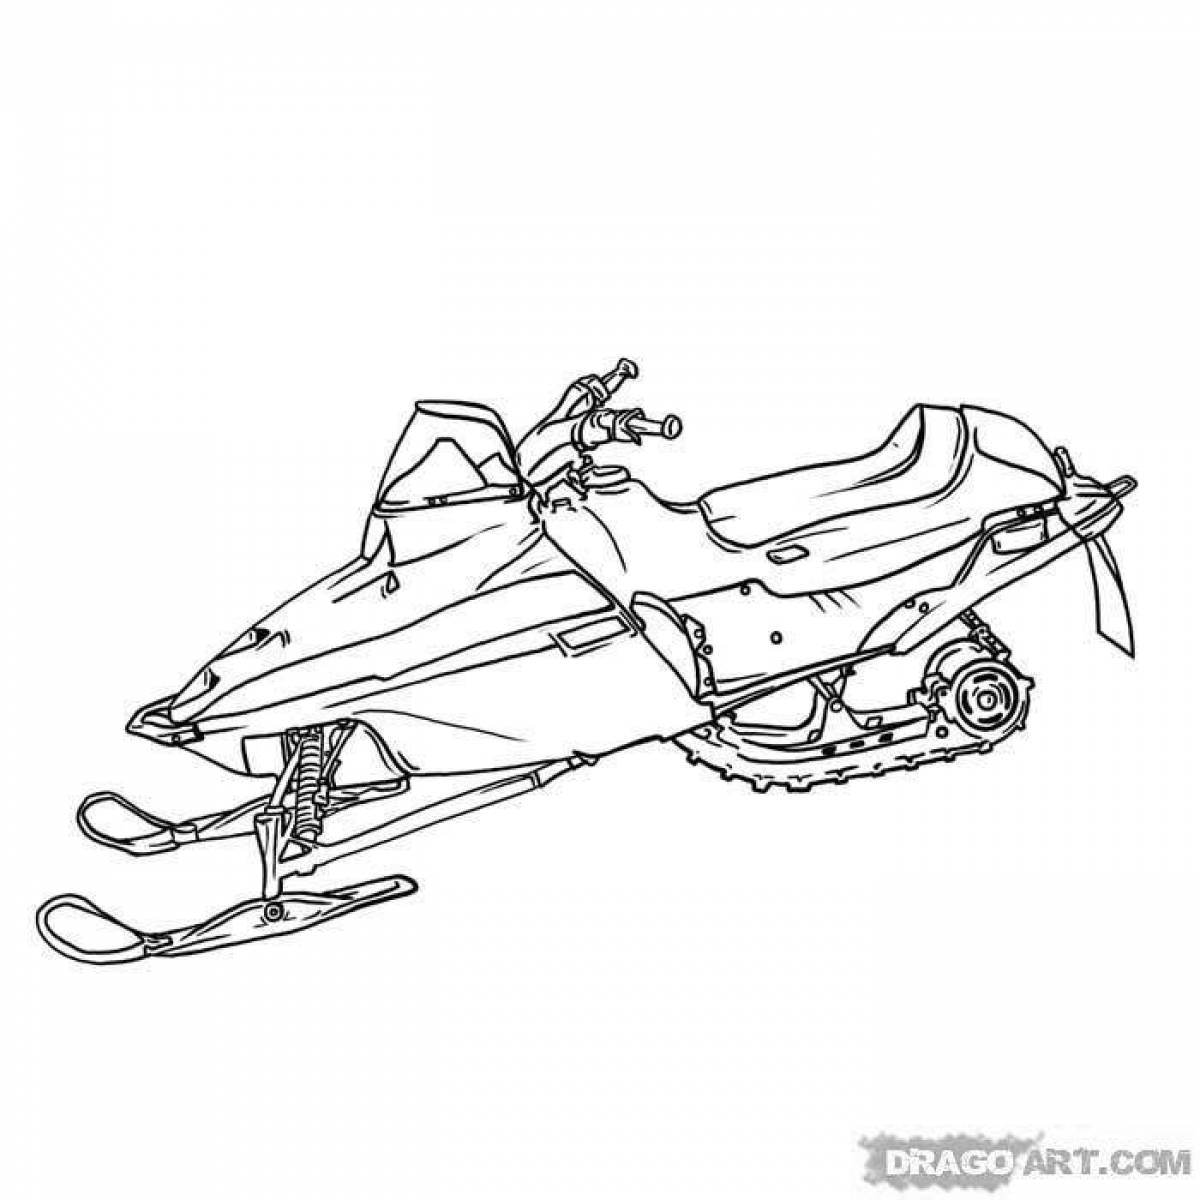 Adorable snowmobile coloring page